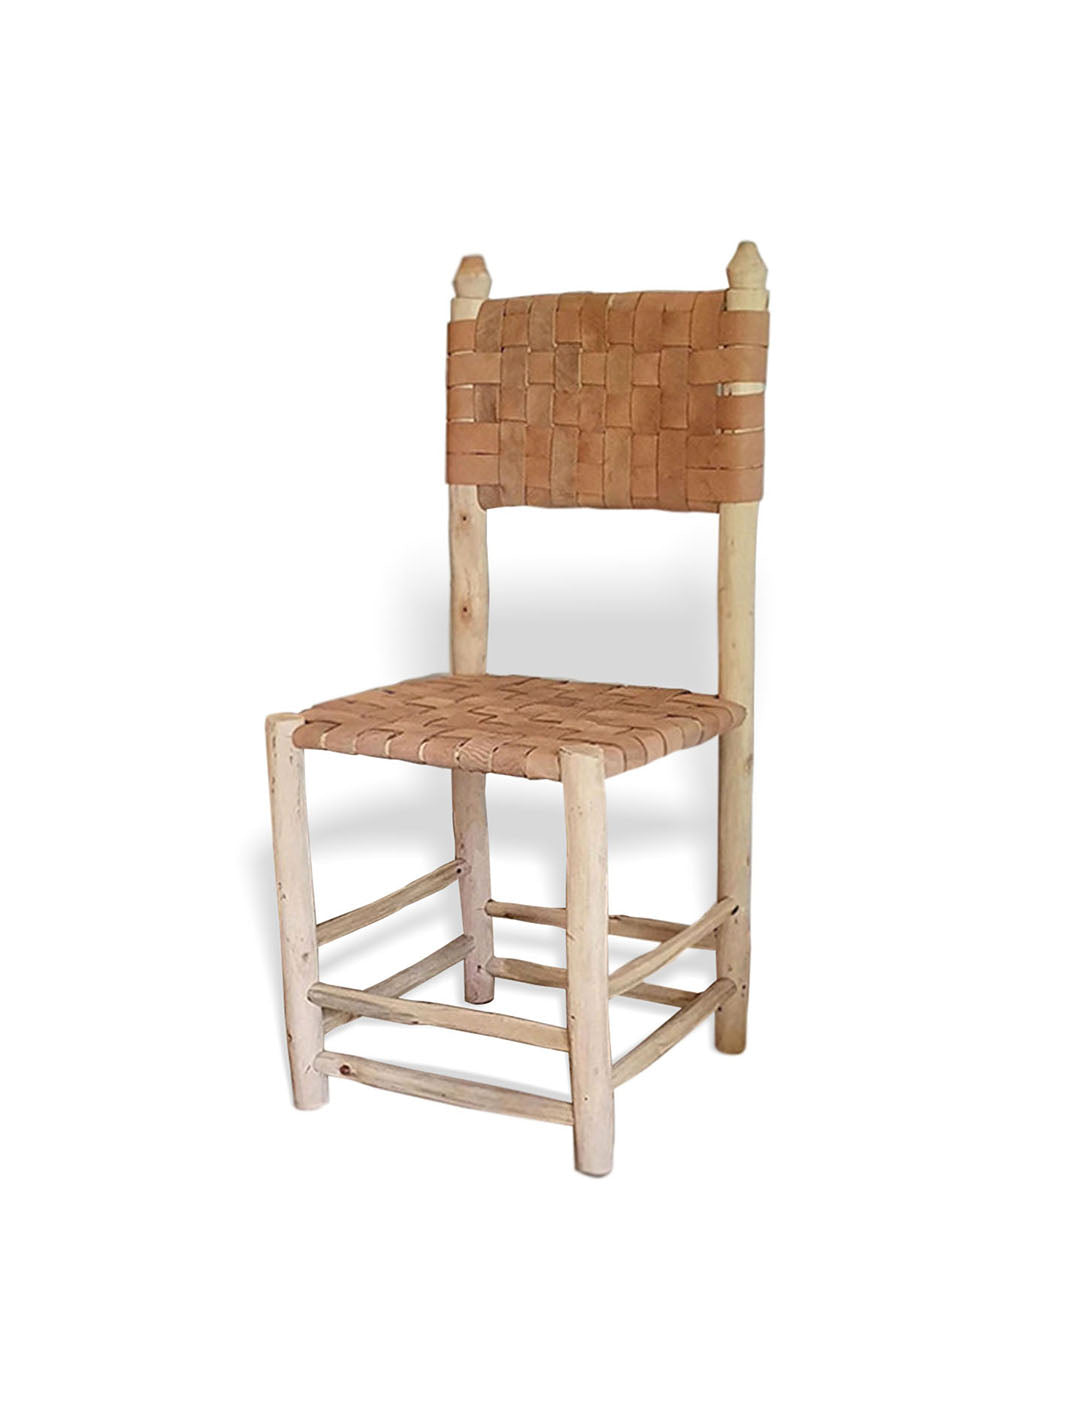 Handcrafted Artisanal Moroccan Laurel Wooden Chair Libitii Chairs LIB-0101